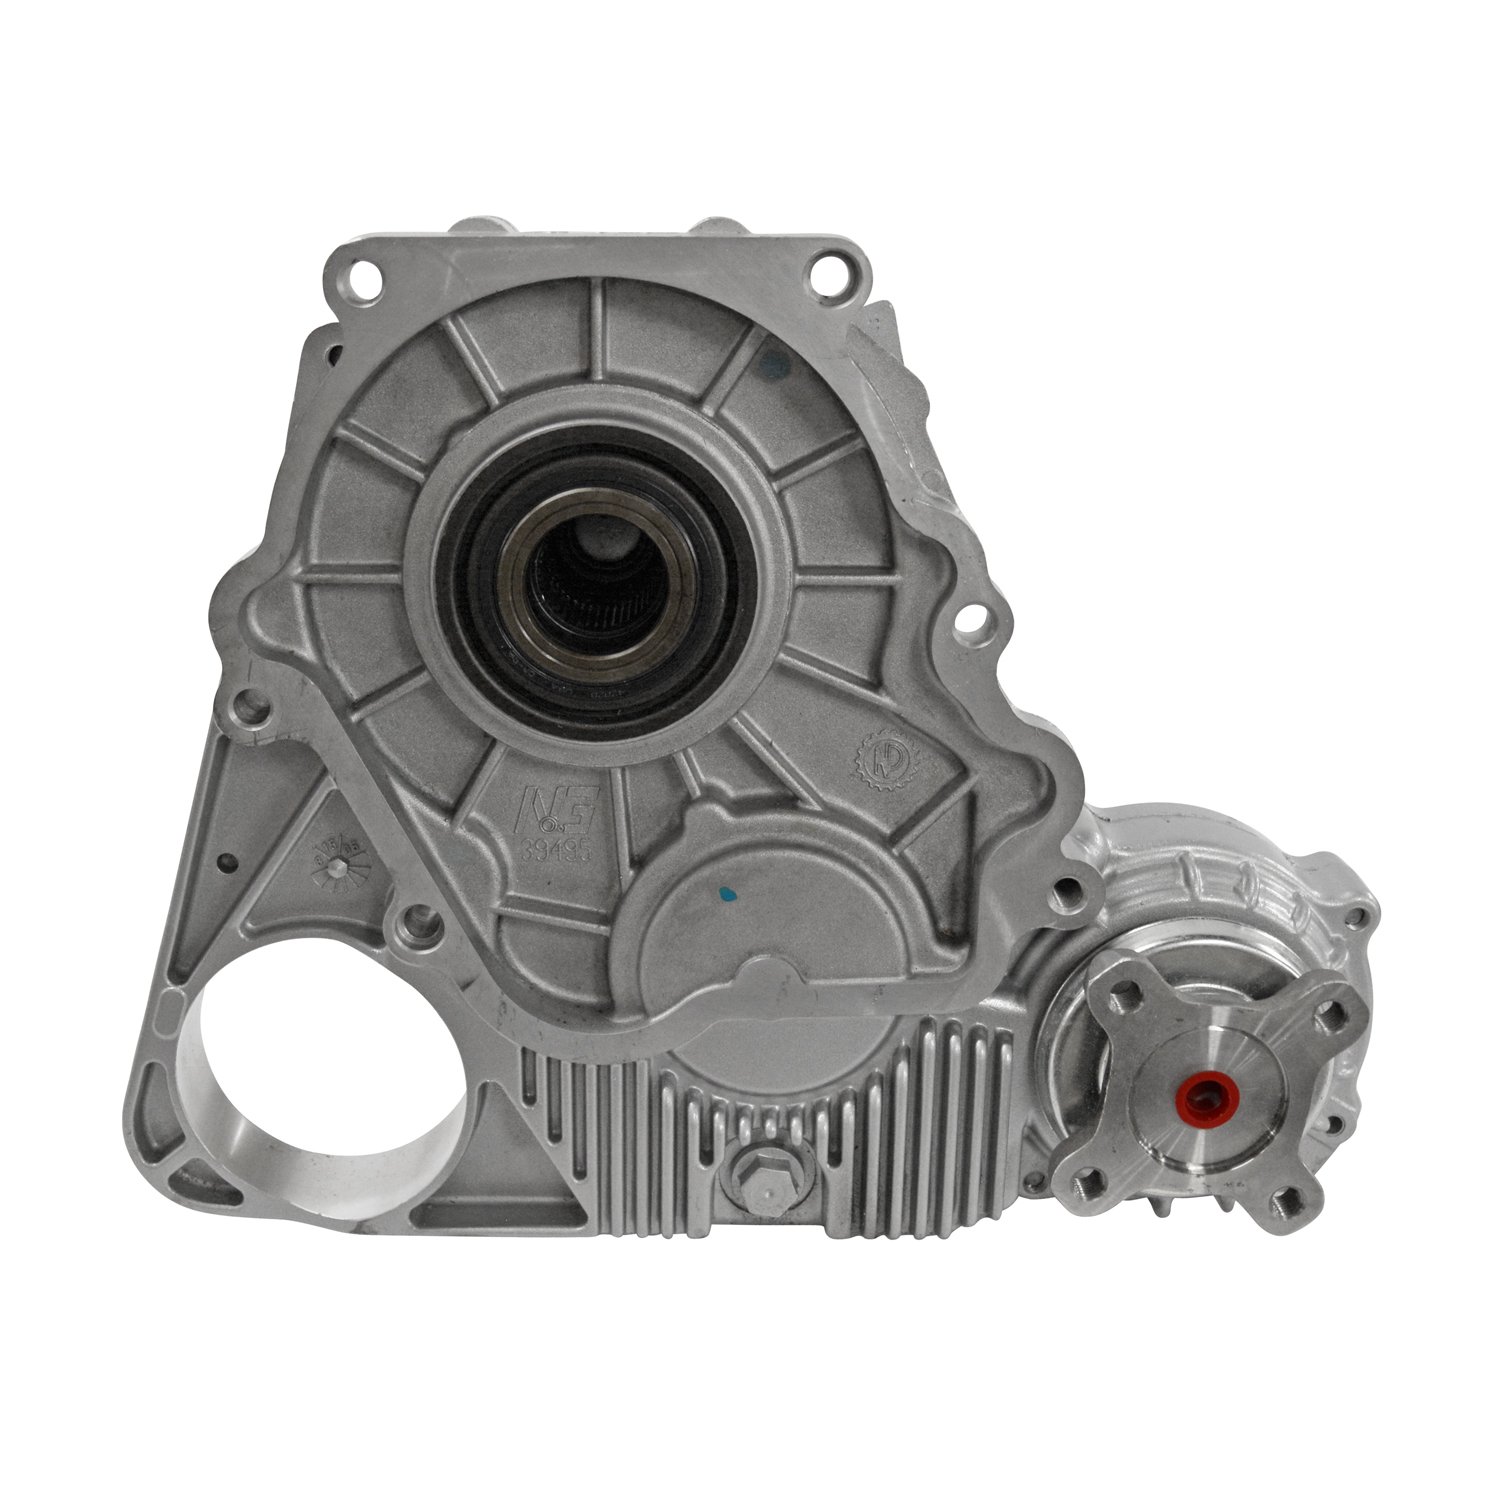 Remanufactured Transfer Case for 2001-2003 BMW 325I & 330I, Automatic